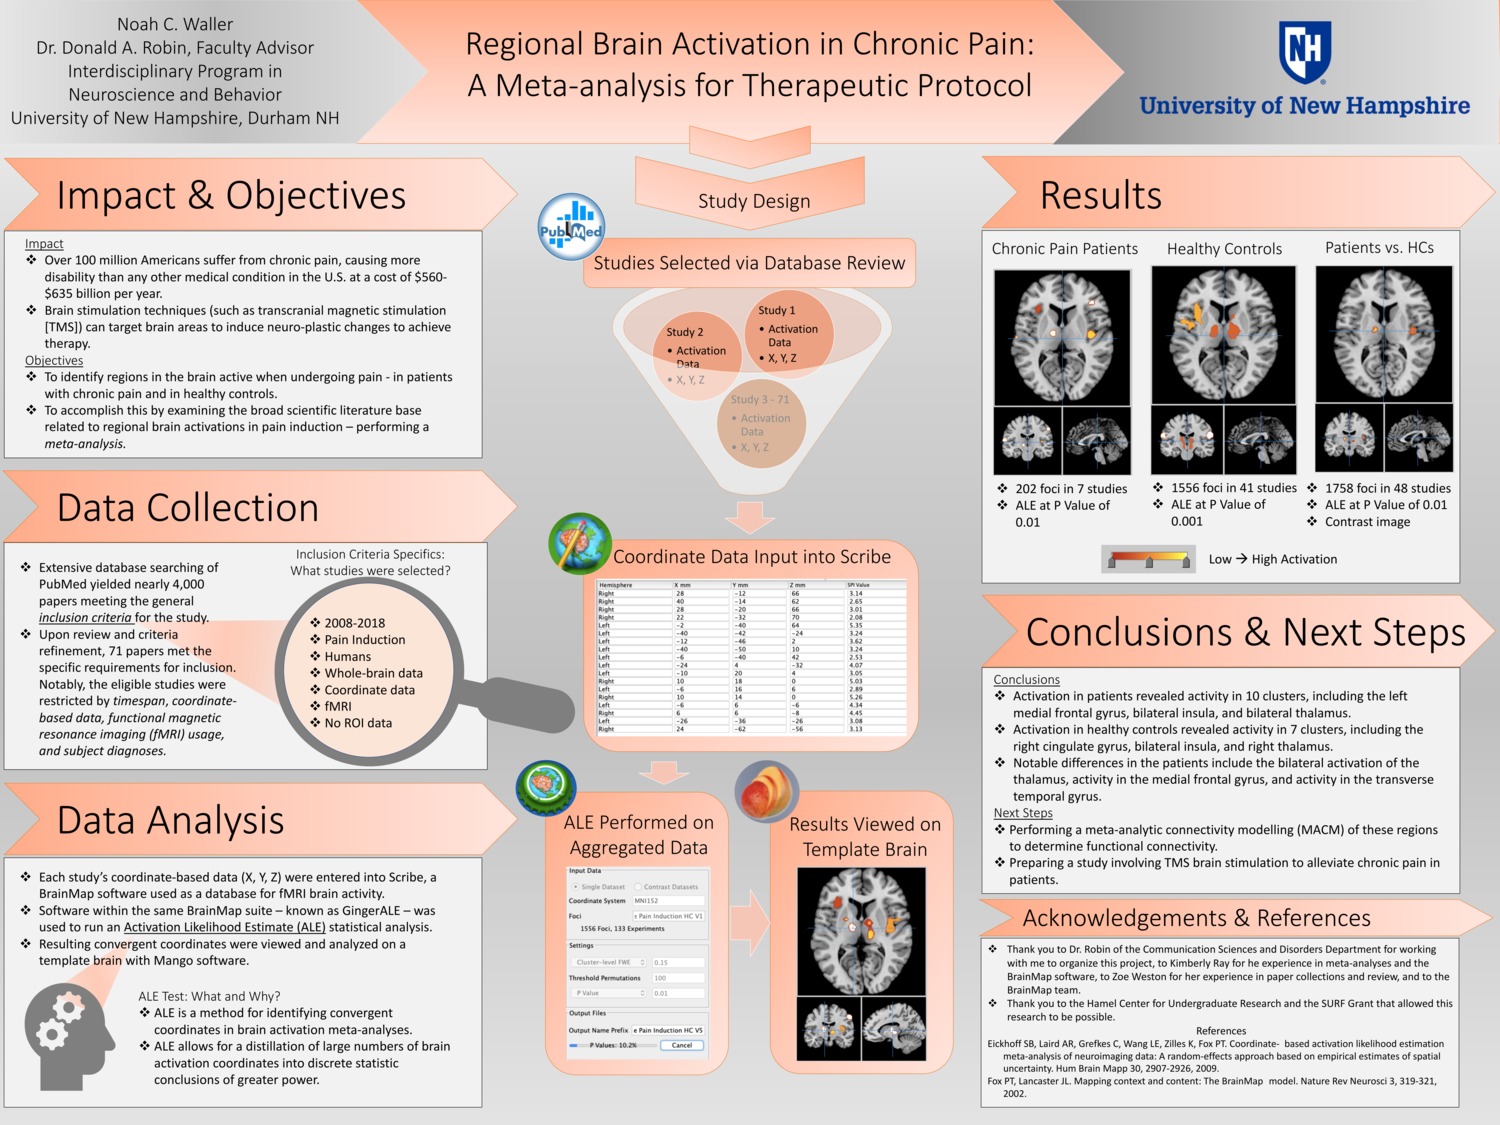 Regional Brain Activation In Chronic Pain: A Meta-Analysis For Therapeutic Protocol by ncw1004